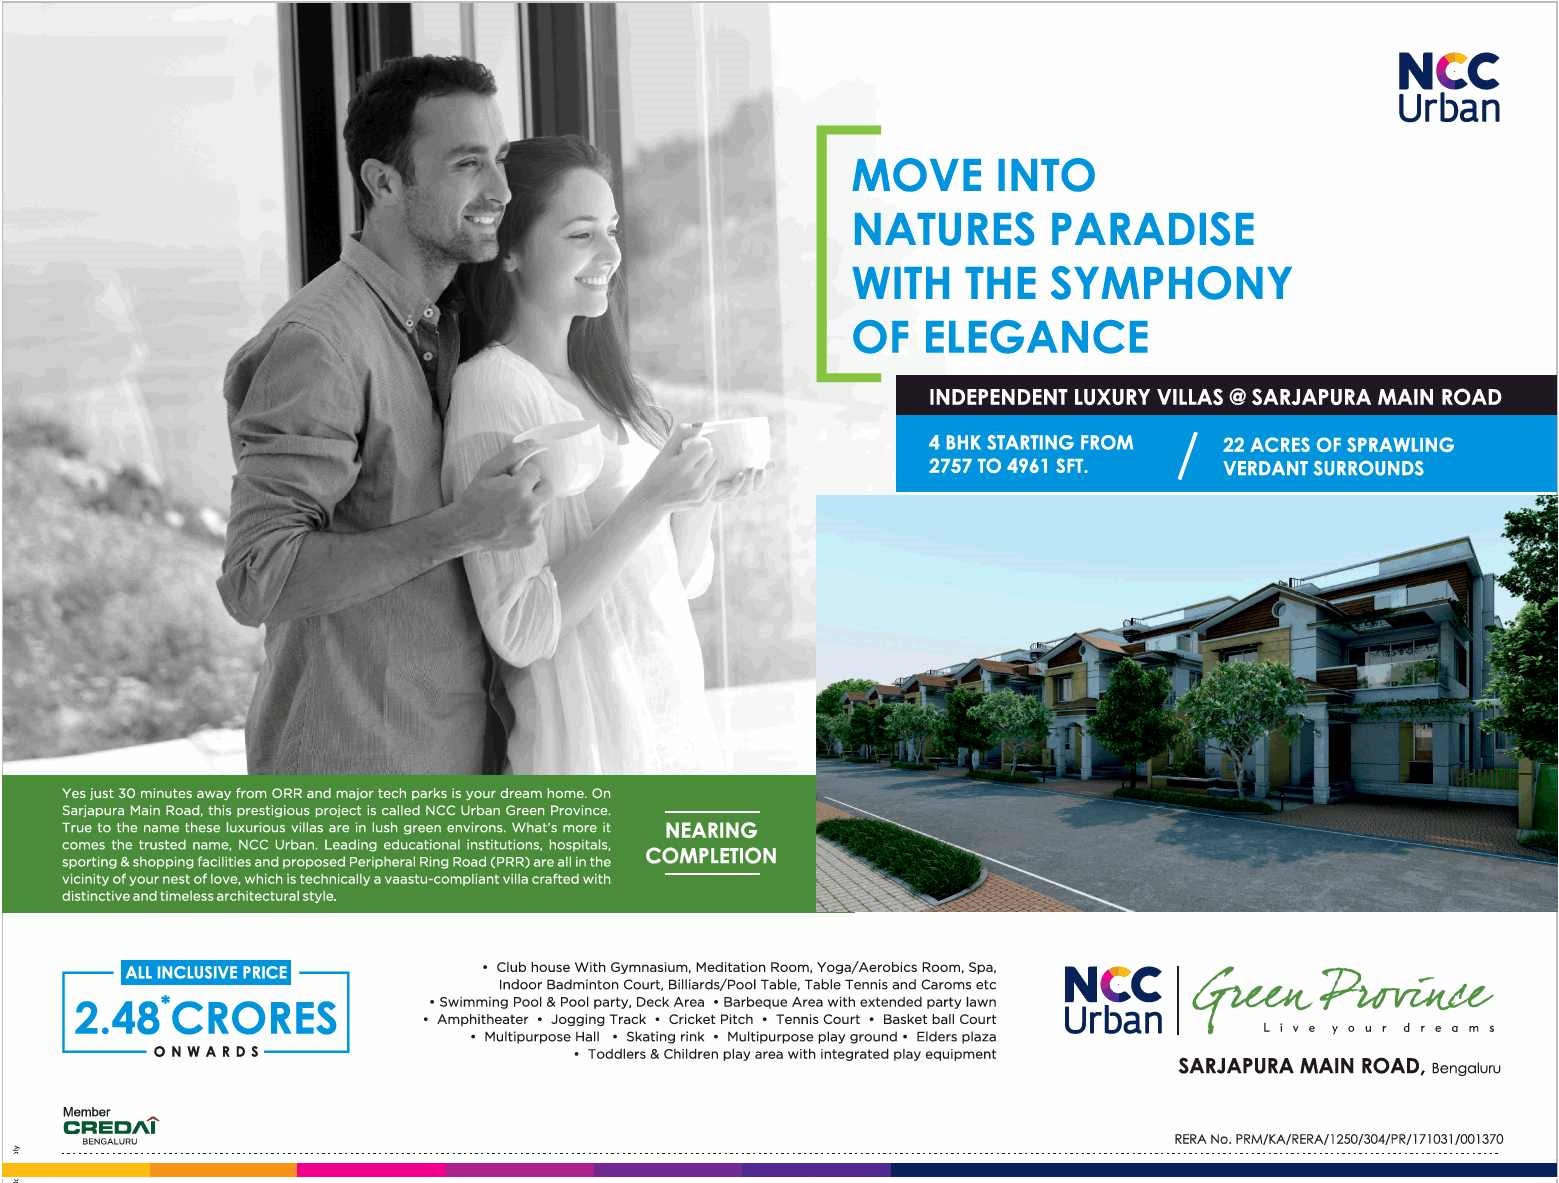 Book independent luxury villas at NCC Urban Green Province in Bangalore Update